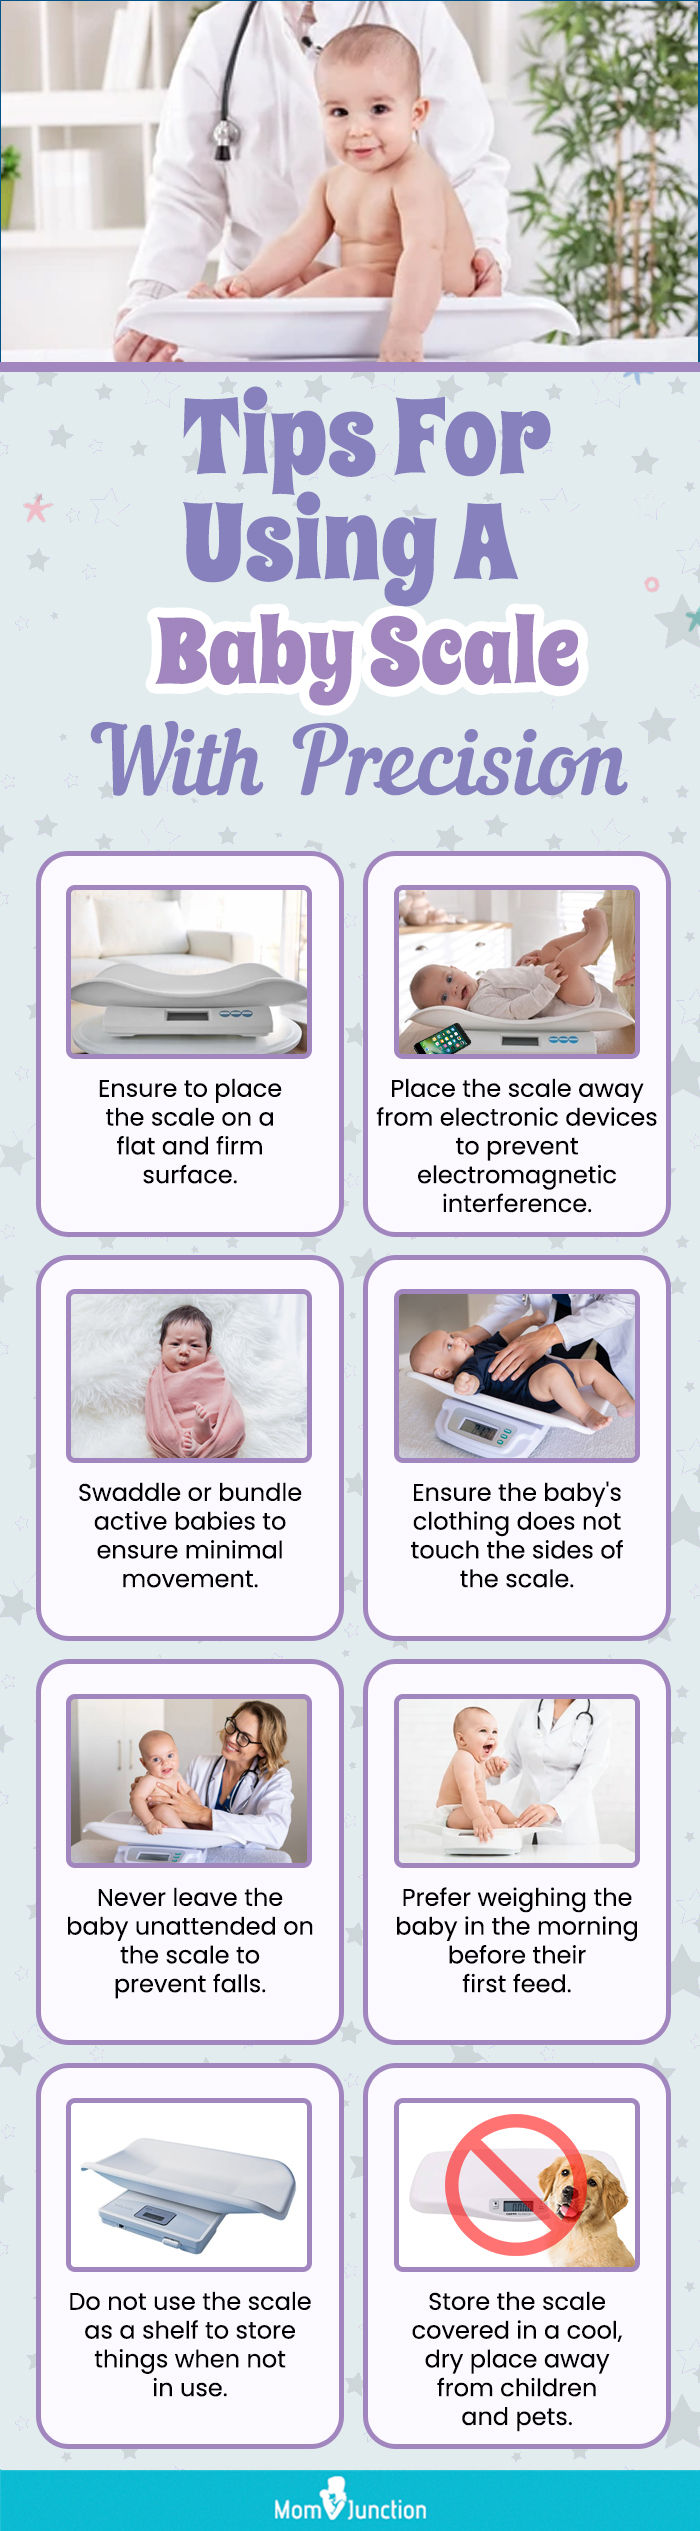 Tips For Using A Baby Scale With Precision (infographic)